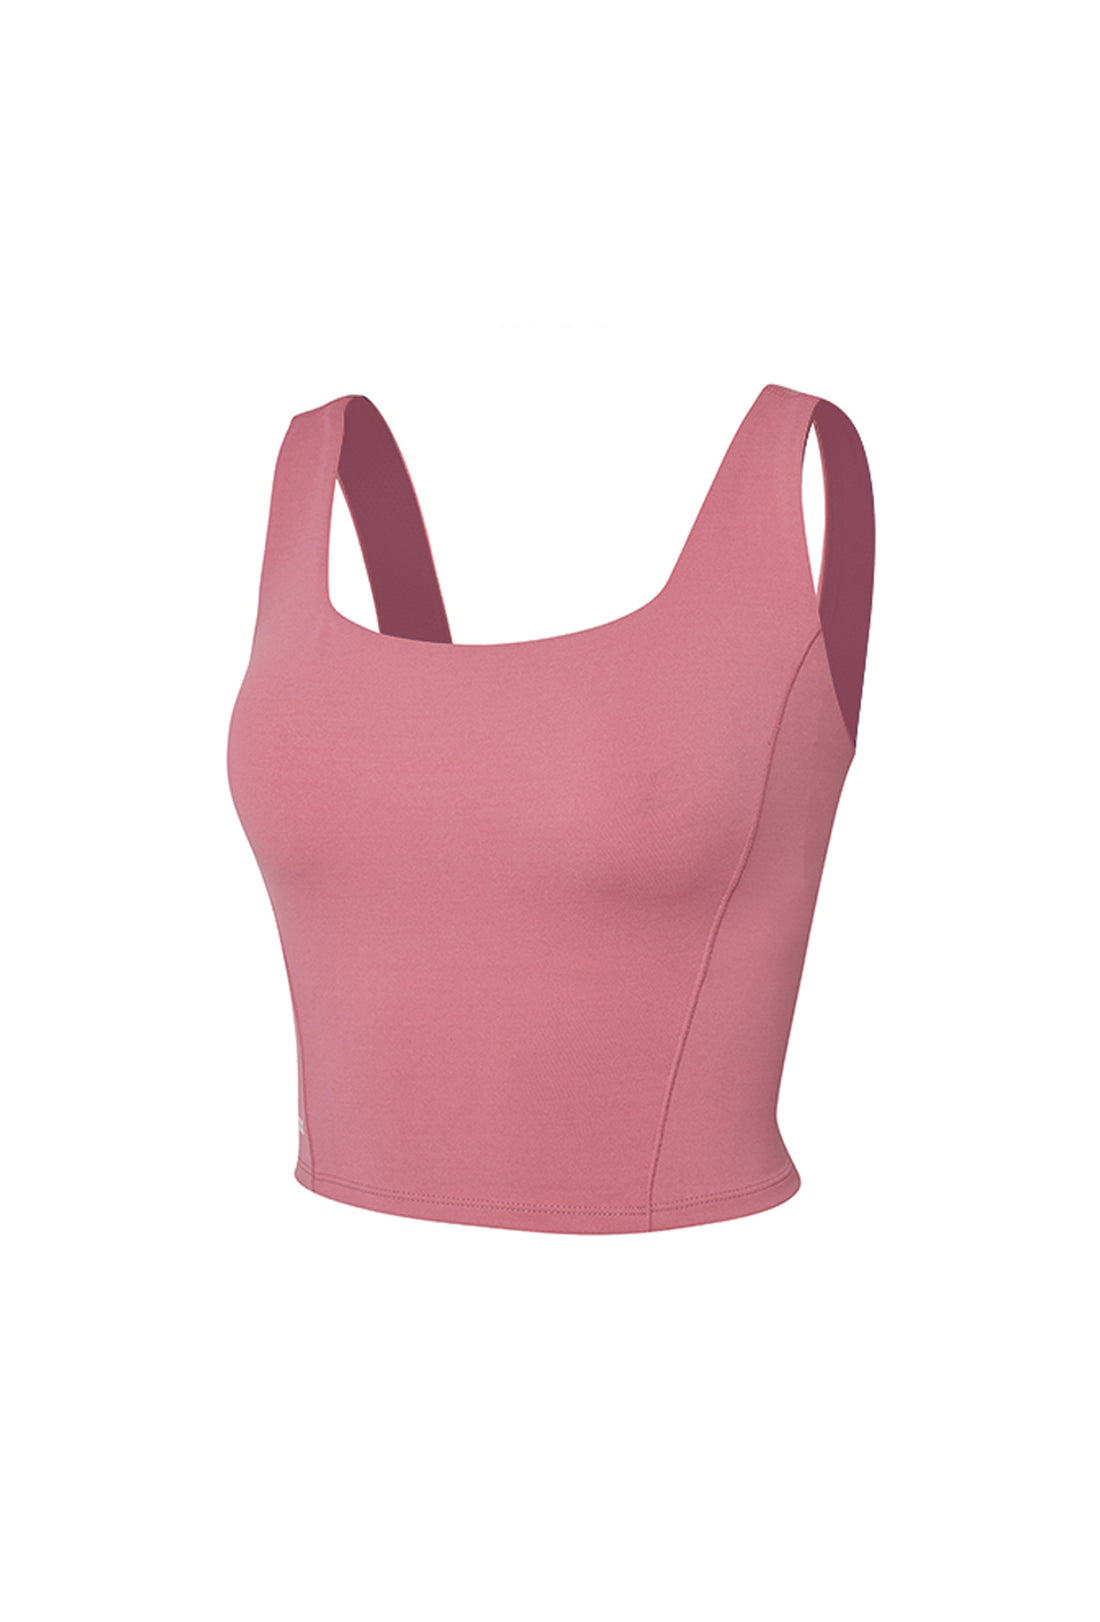 XEXYMIX Black Label Signature 380N Support Top - Holly Berry